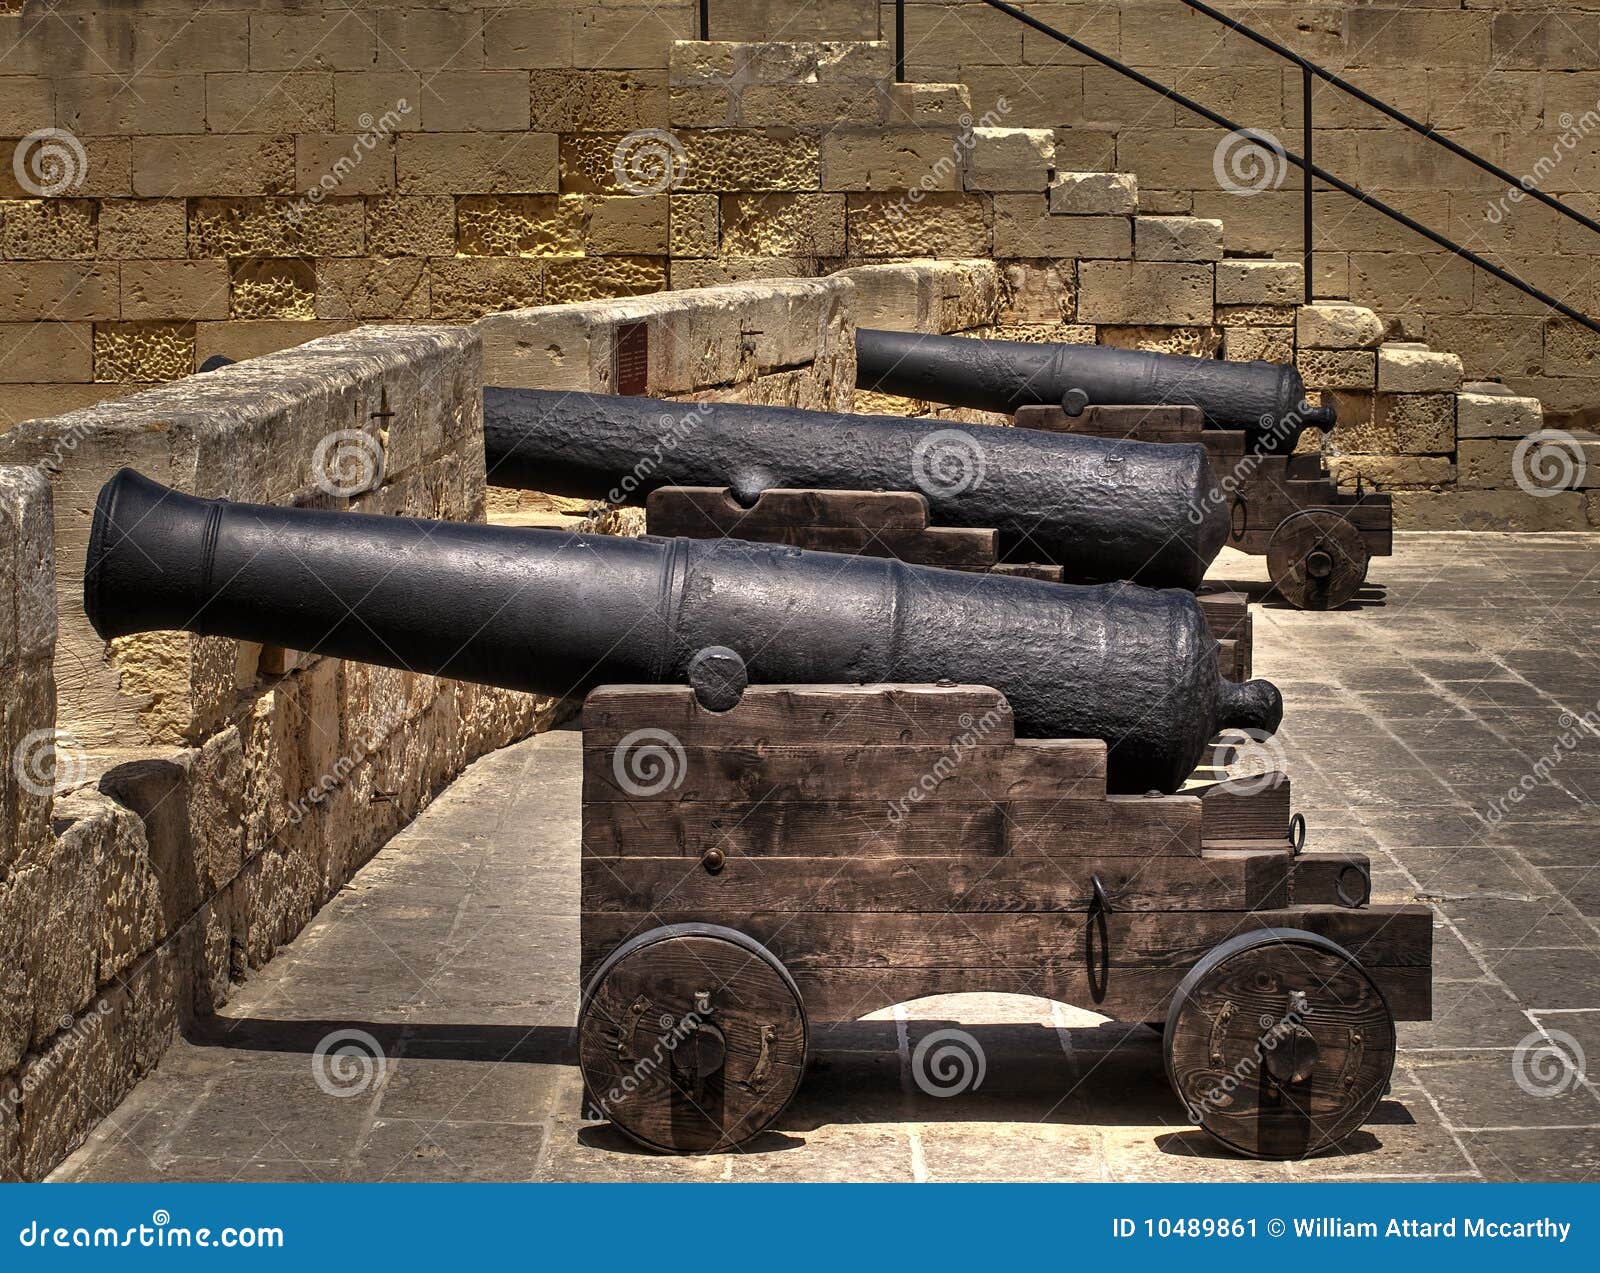 Medieval Cannons stock image. Image of epic, armor, heritage